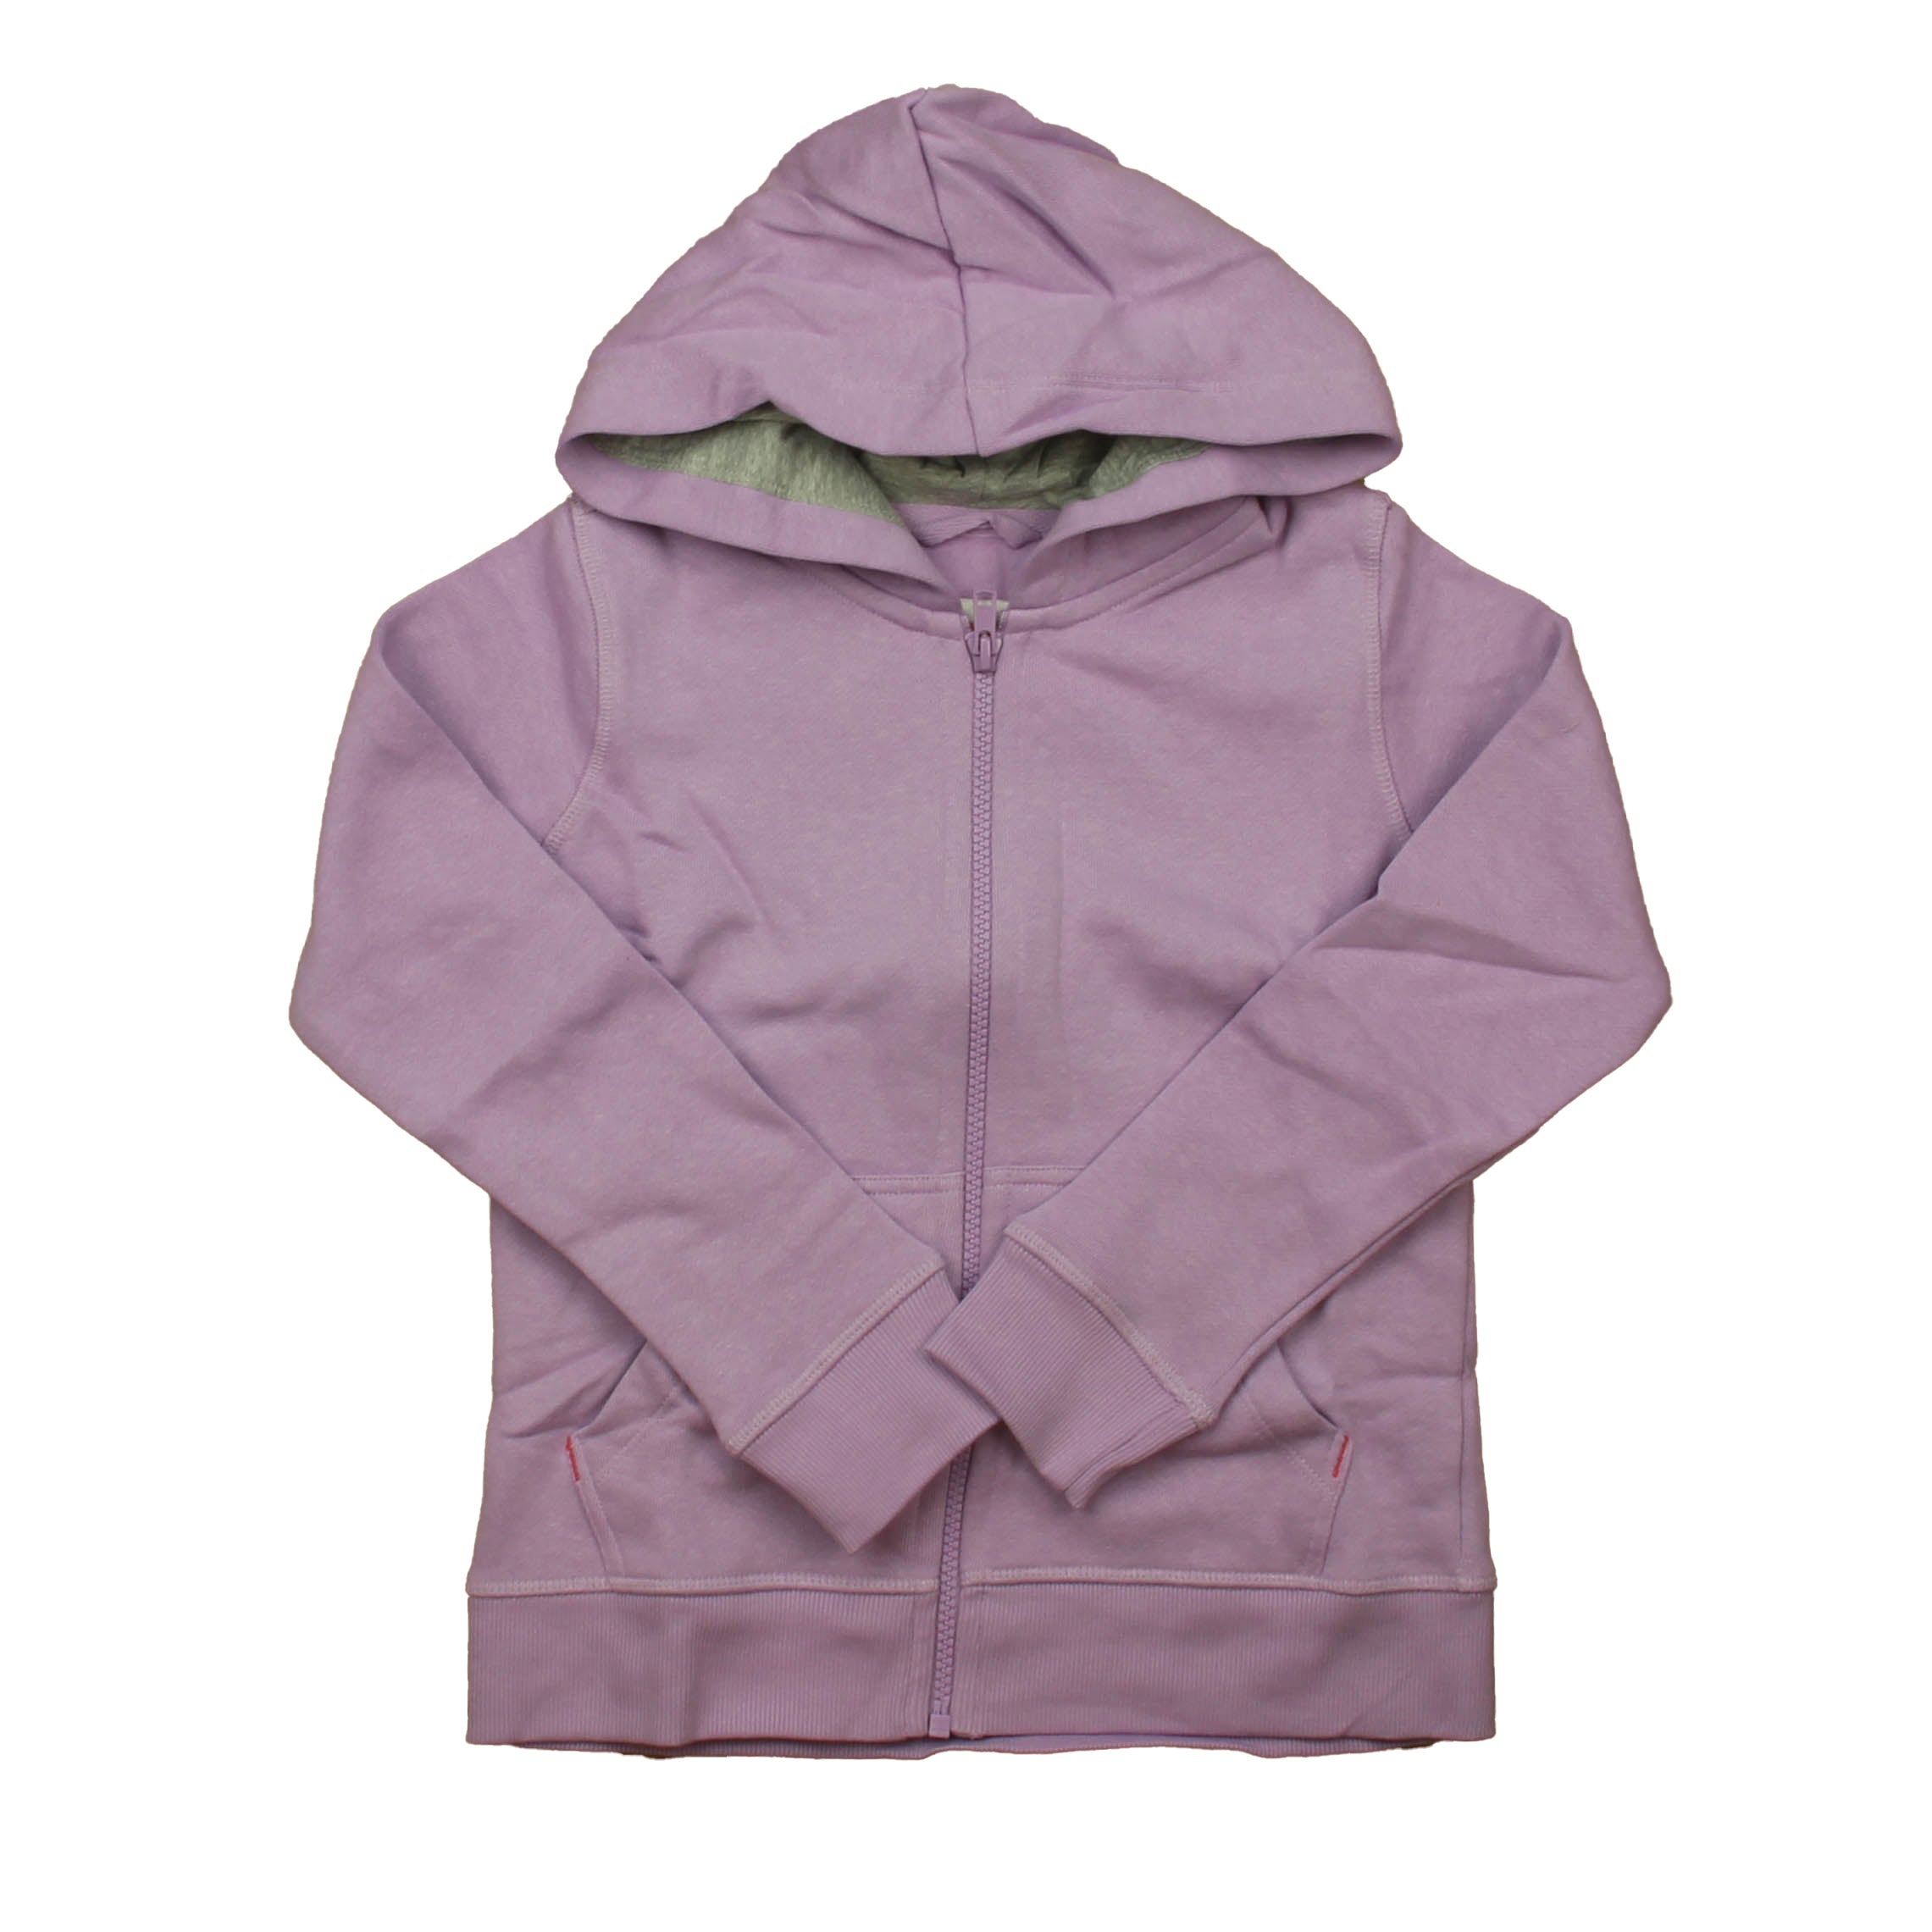 Pre-owned Lilac Sweatshirt size: 6 Years